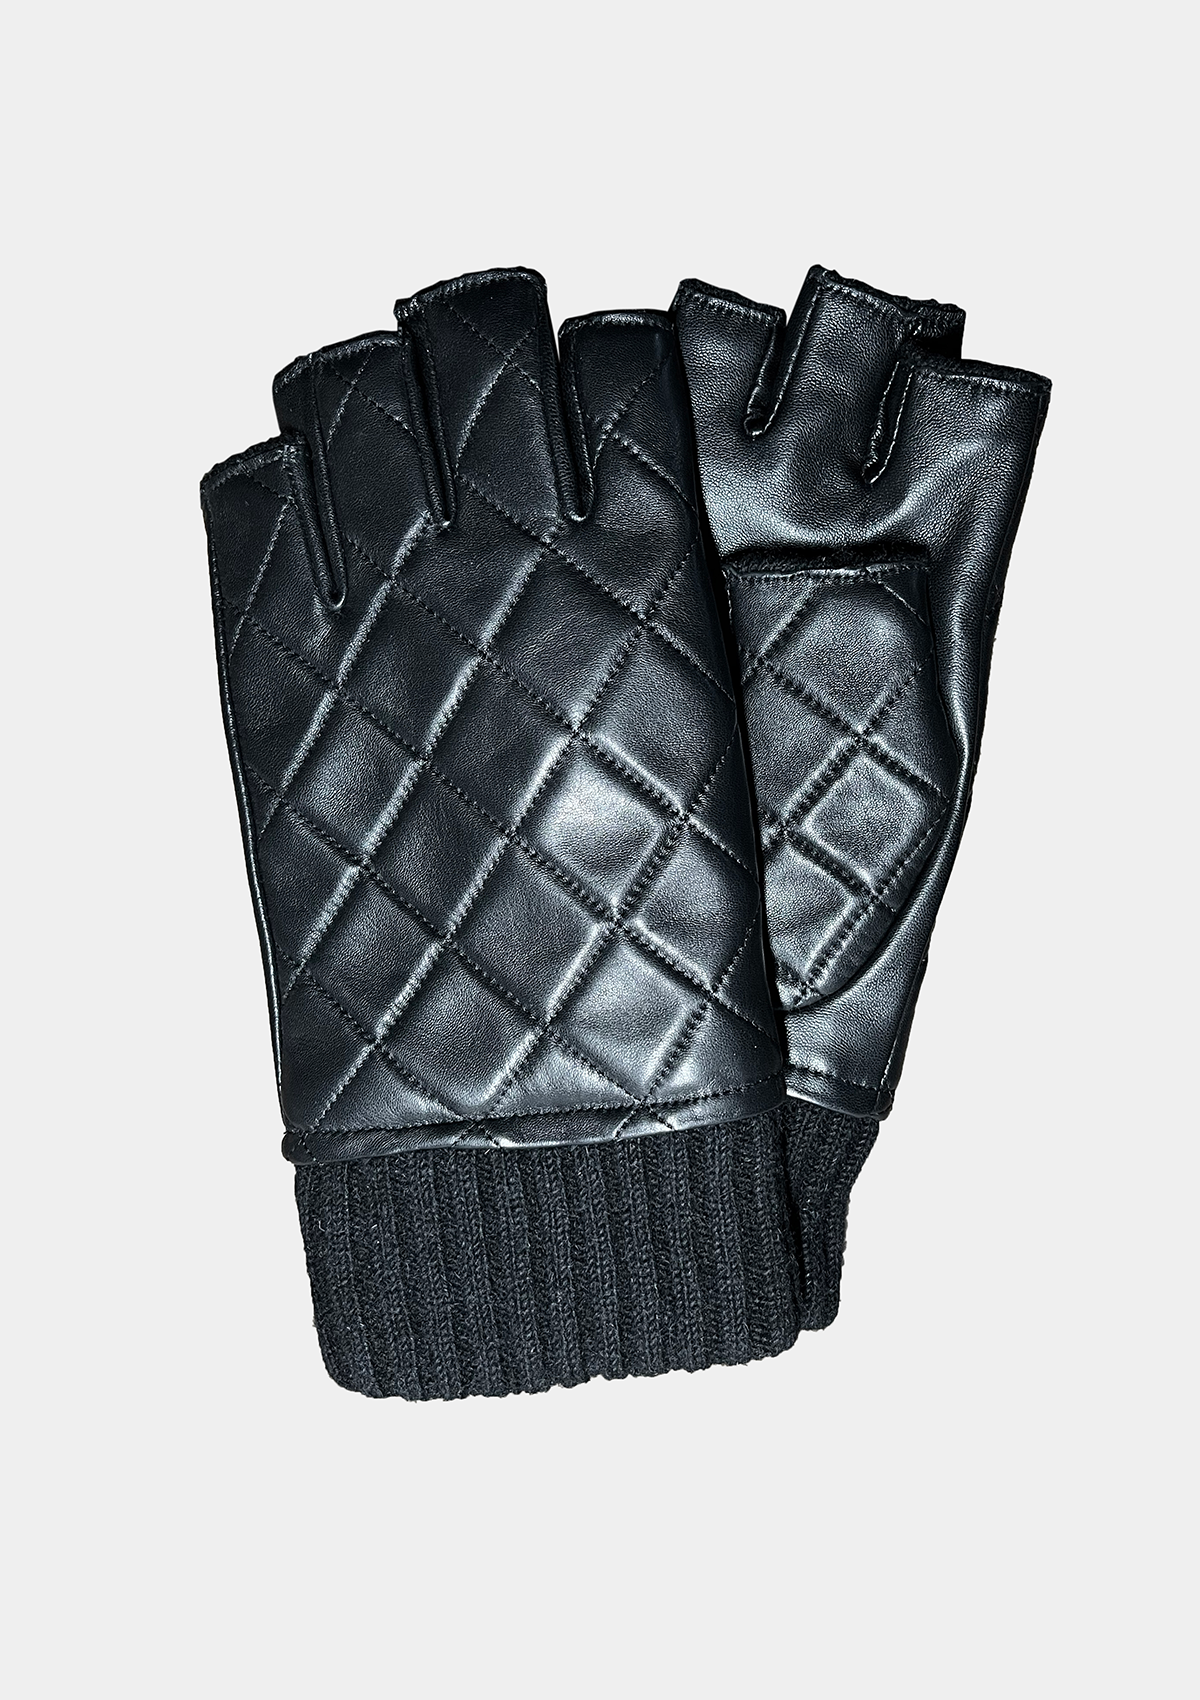 AND GLOVES FINGERLESS KNIT LEATHER QUILTED